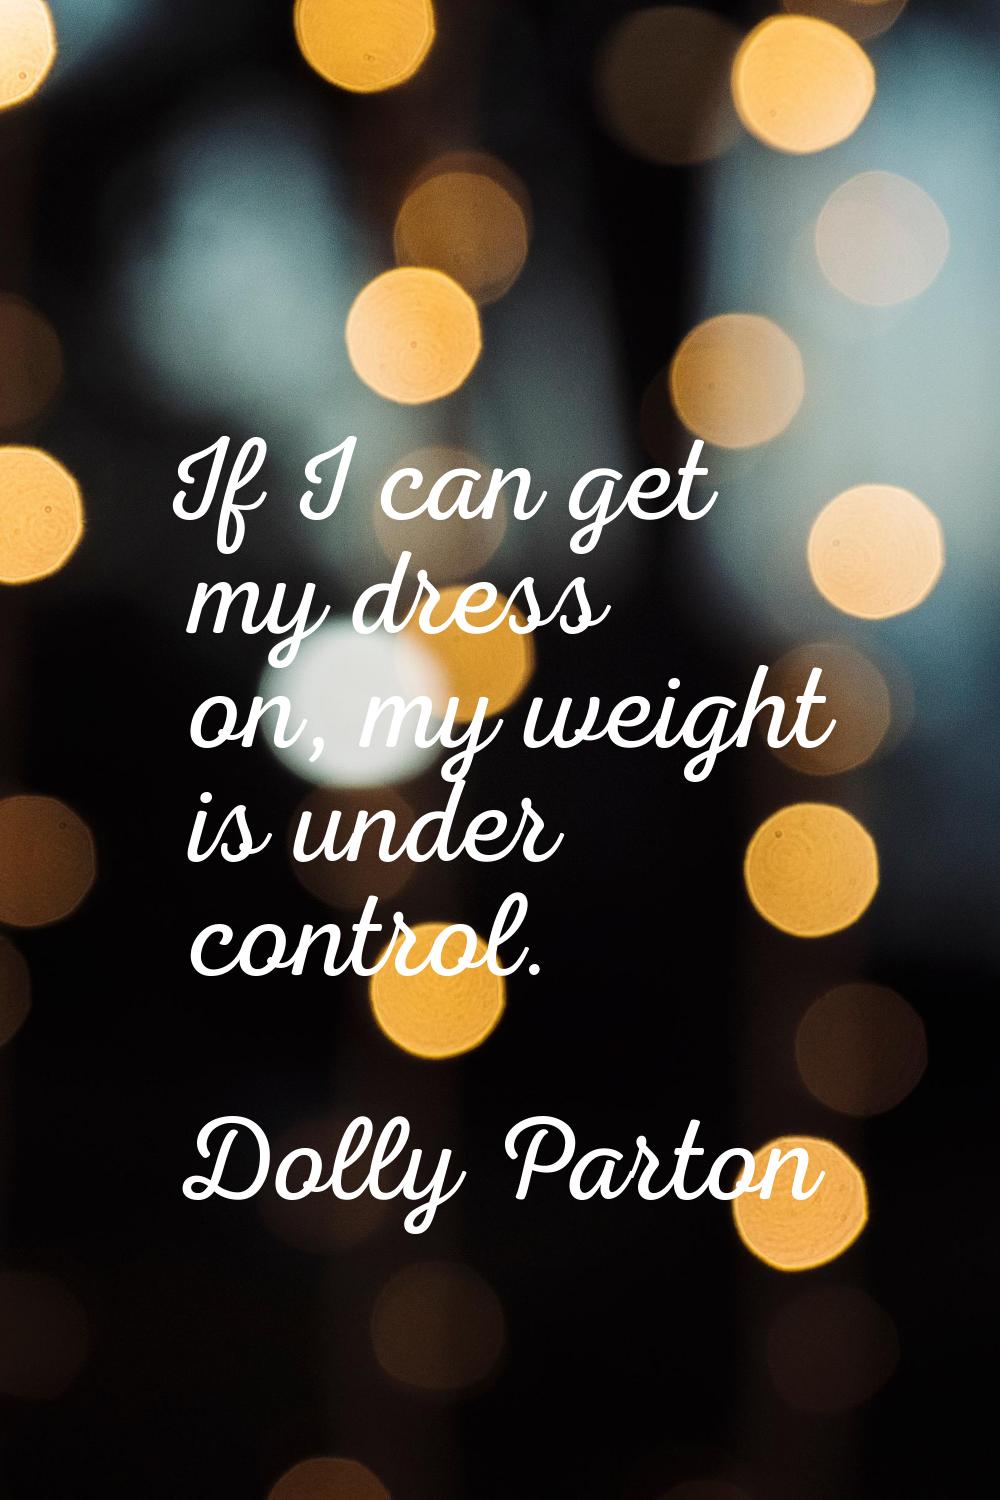 If I can get my dress on, my weight is under control.